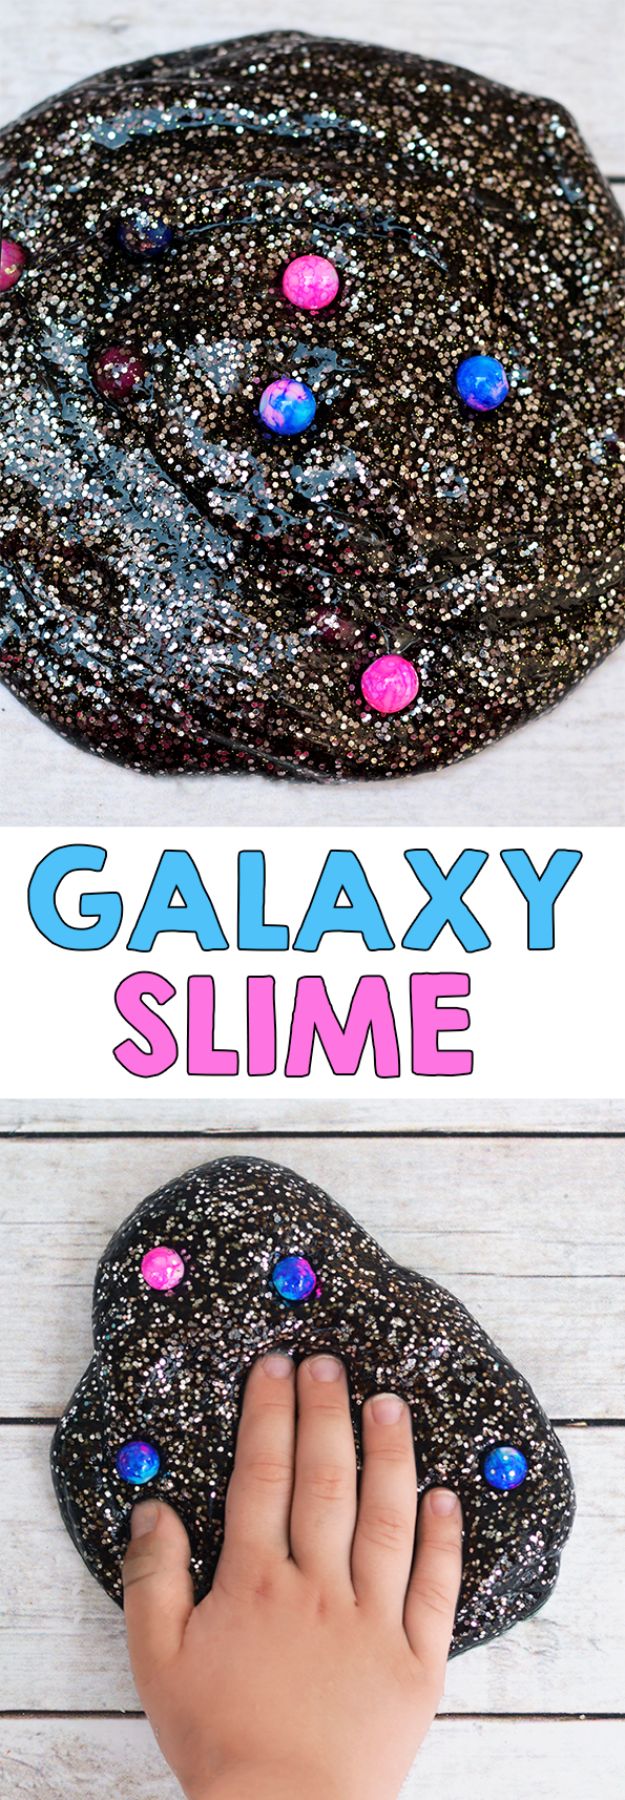 Galaxy DIY Crafts - Galaxy Slime - Easy Room Decor, Cool Clothes, Fun Fabric Ideas and Painting Projects - Food, Cookies and Cupcake Recipes - Nebula Galaxy In A Jar - Art for Your Bedroom - Shirt, Backpack, Soap, Decorations for Teens, Kids and Adults 